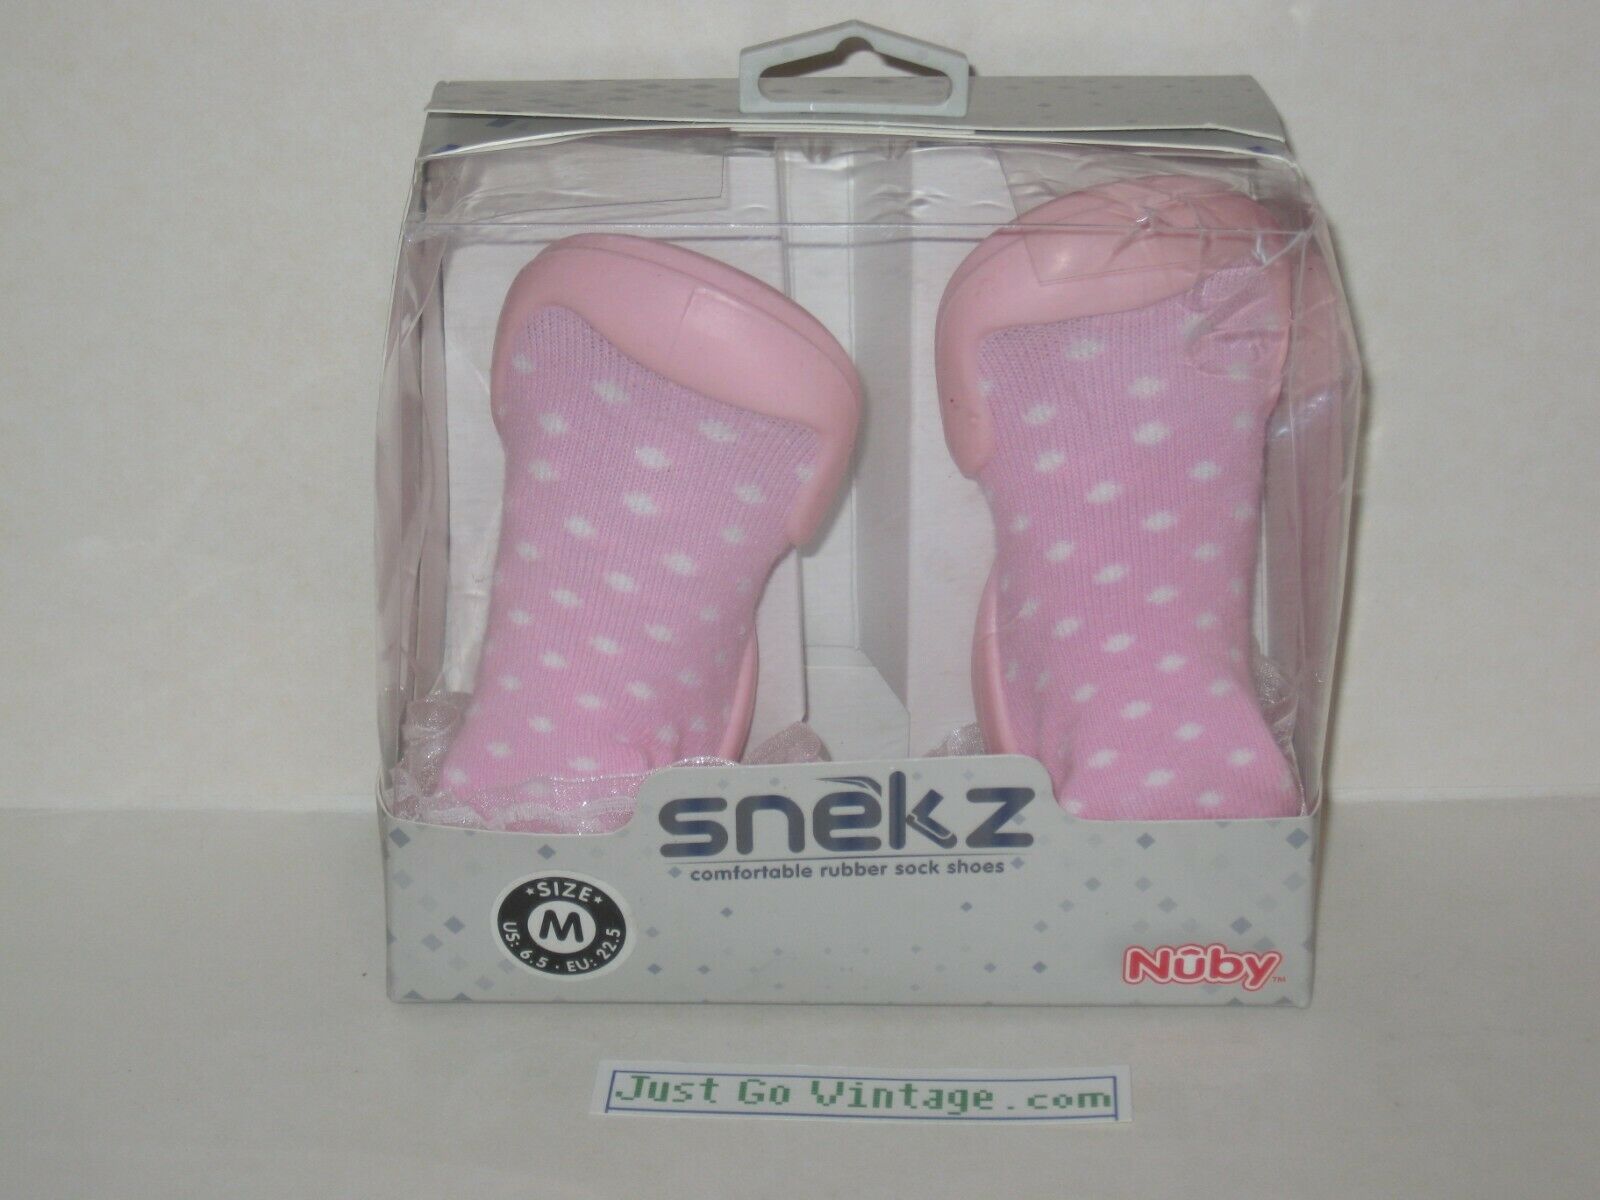 Nuby Snekz Comfortable Rubber Sole Sock Shoes Size Medium Baby Pink Polka Dt New